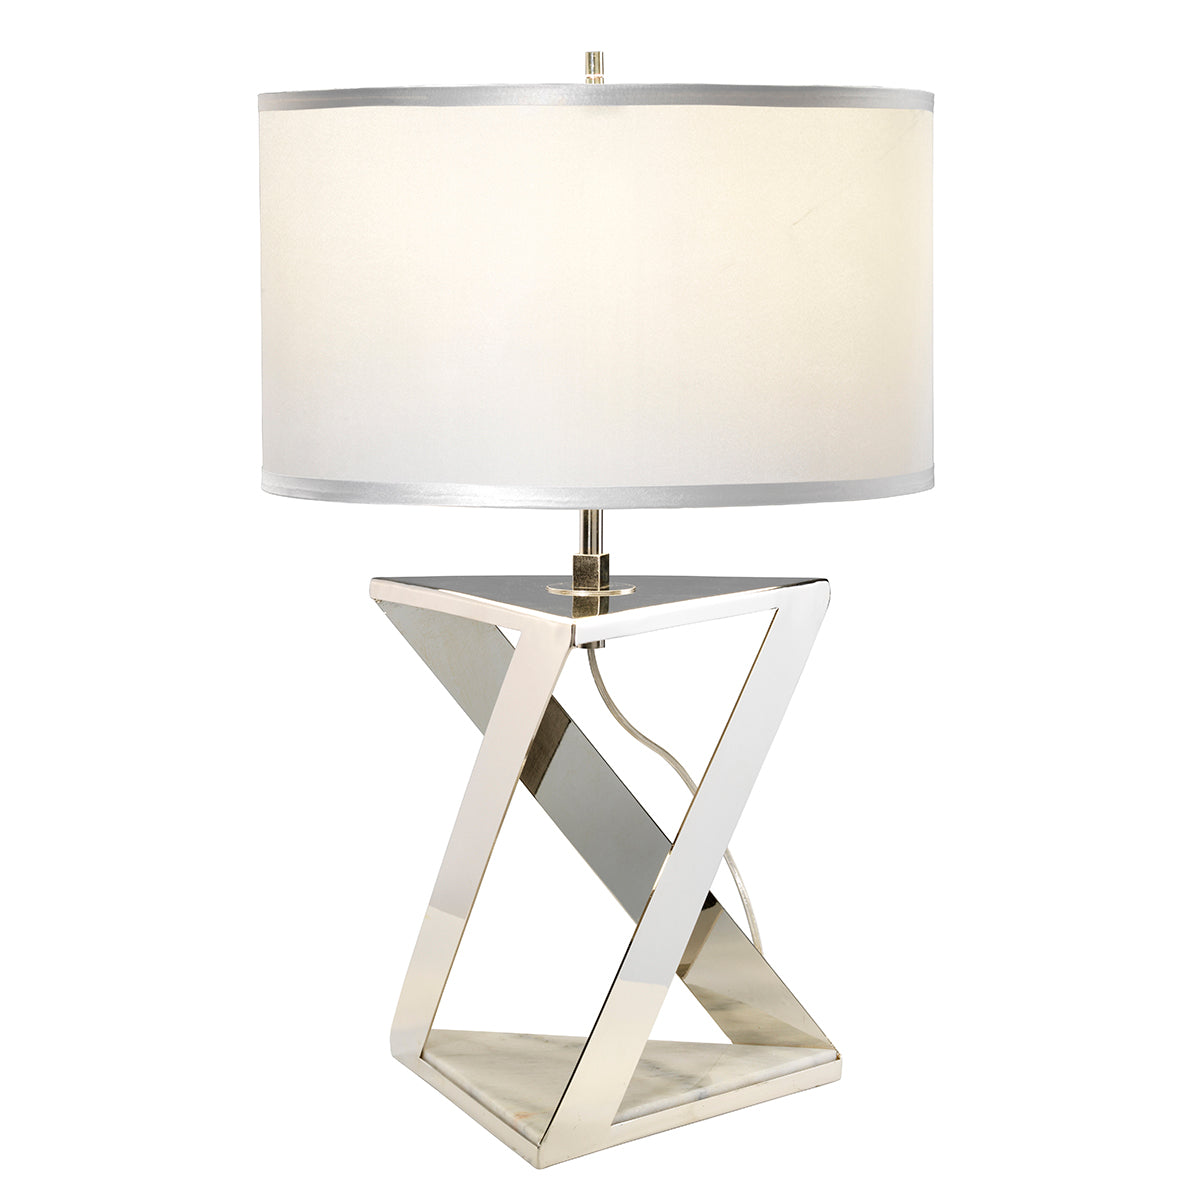 Polished Nickel Table Lamp With White Marble Base - ID 9392